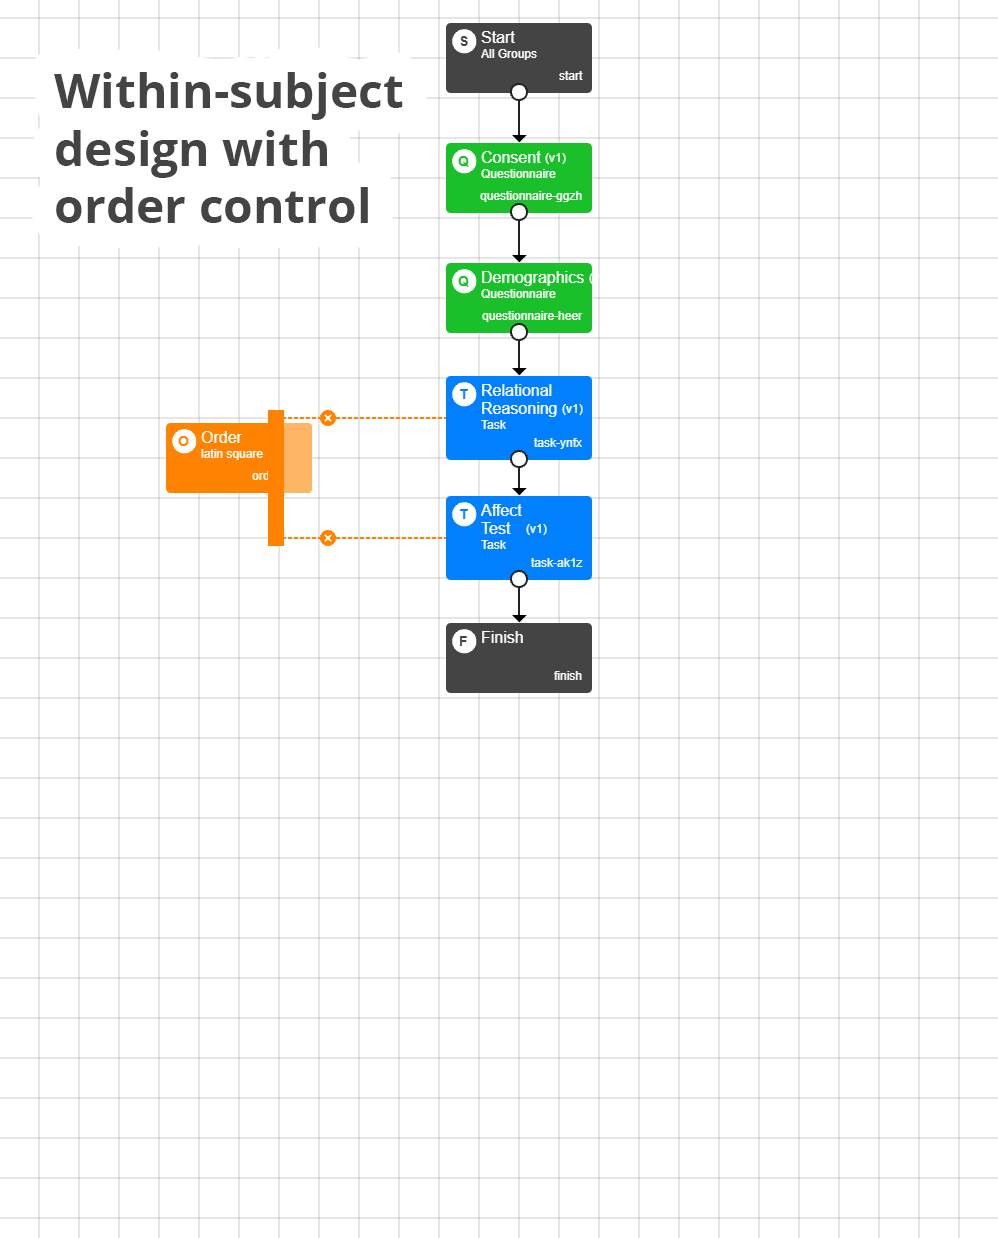 Screenshot of Experiment Builder showing a within-subject design with order control